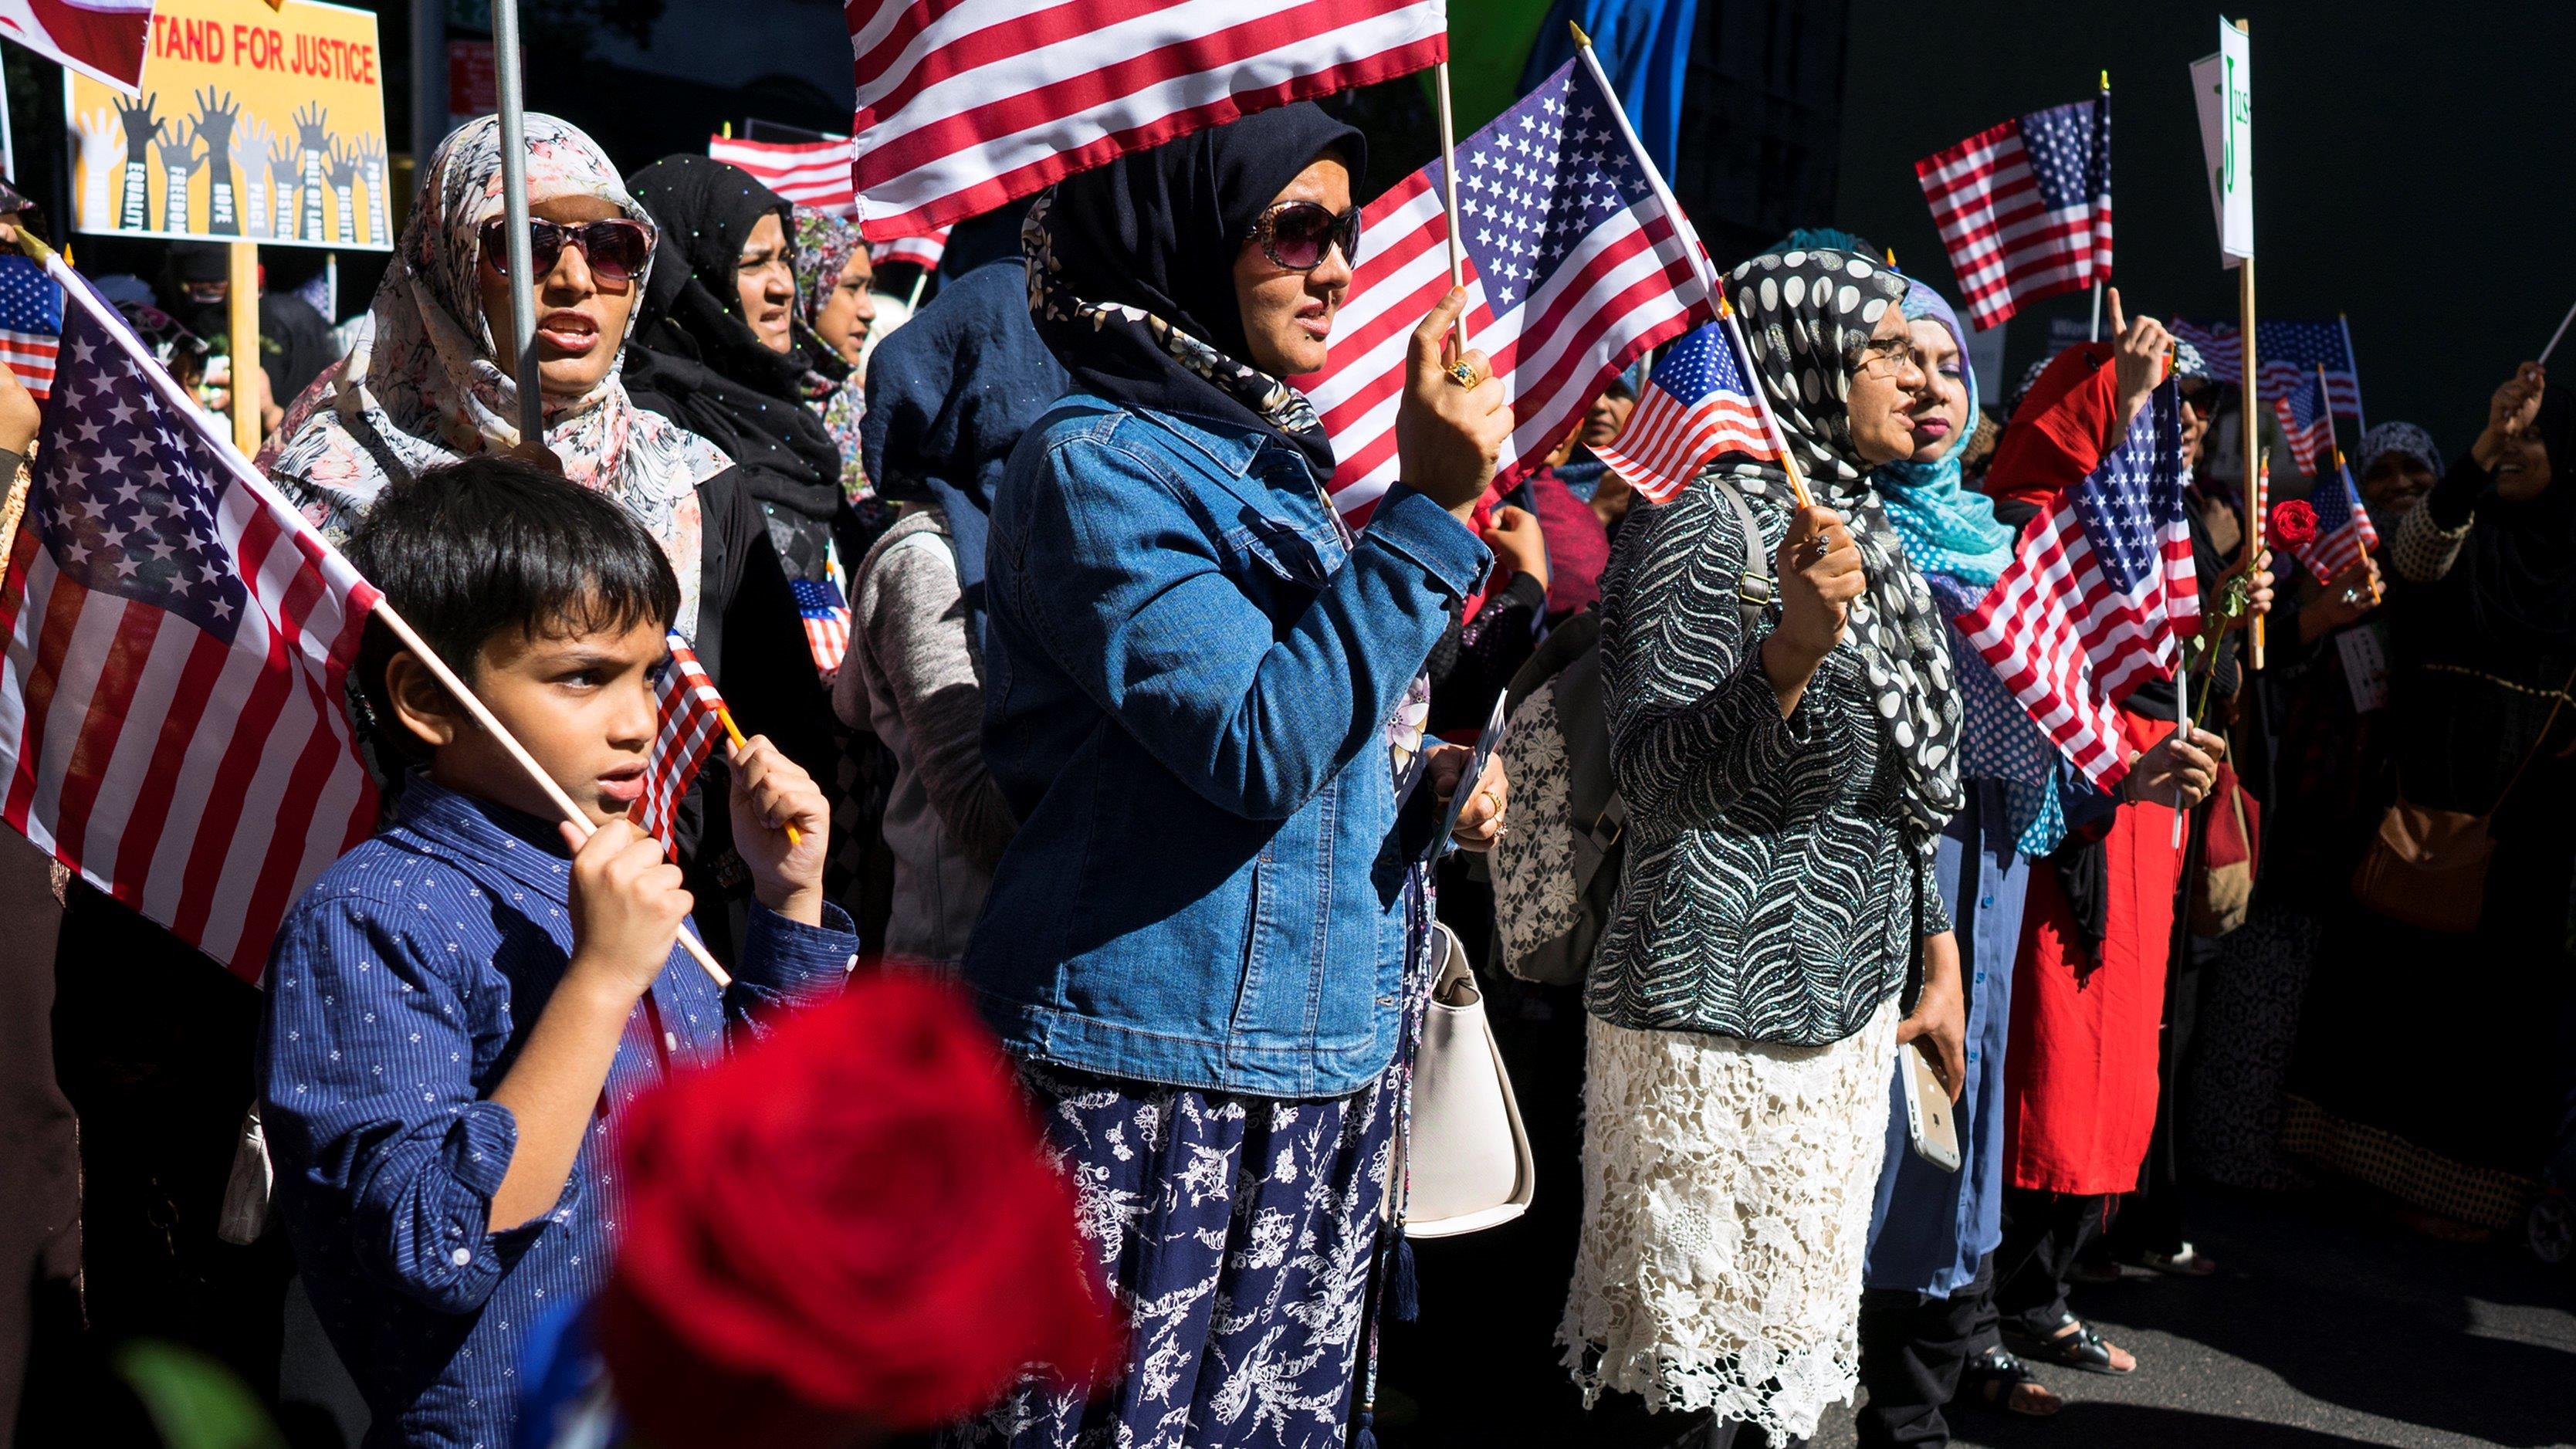 Poll: Just 6% of Muslim-American voters support GOP